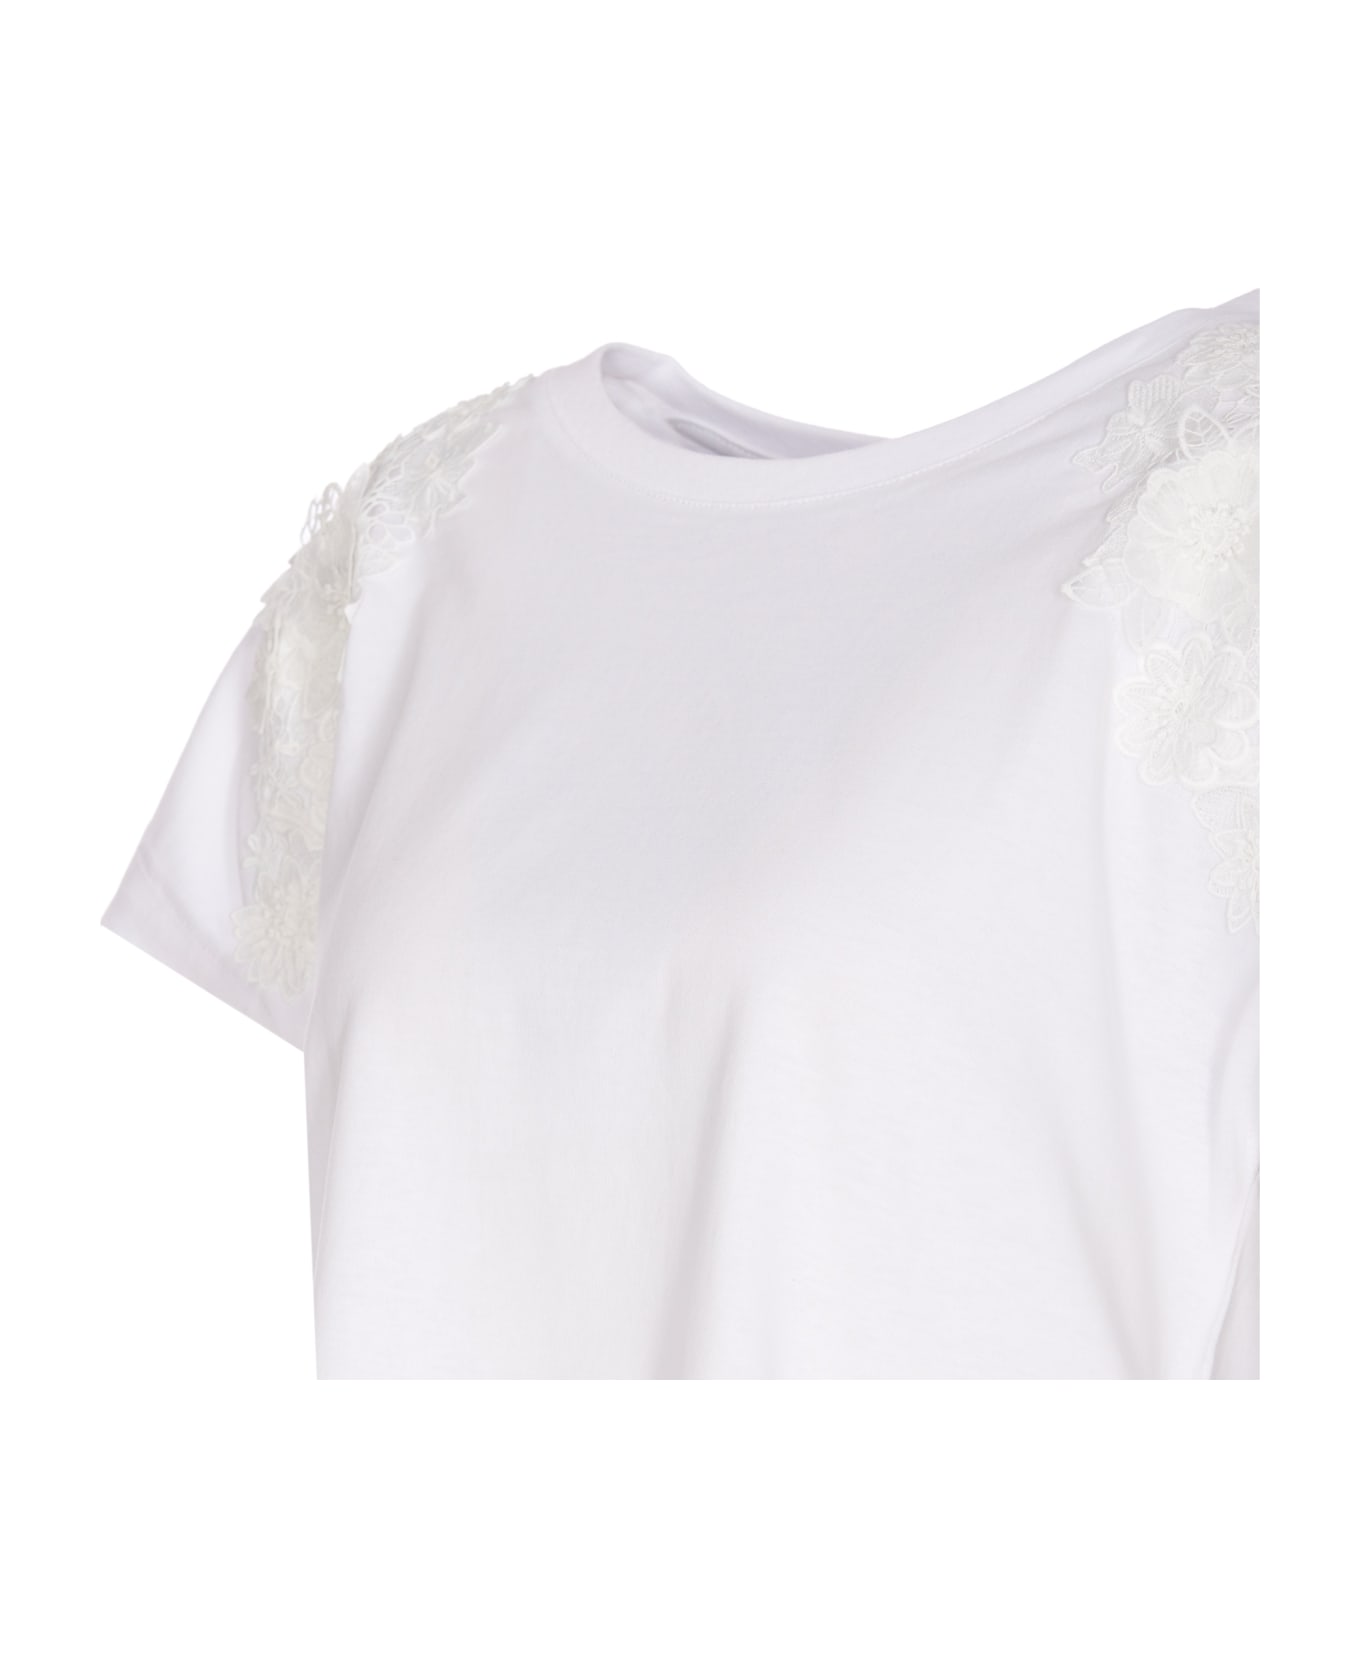 TwinSet T-shirt With Lace Details - Bianco Tシャツ